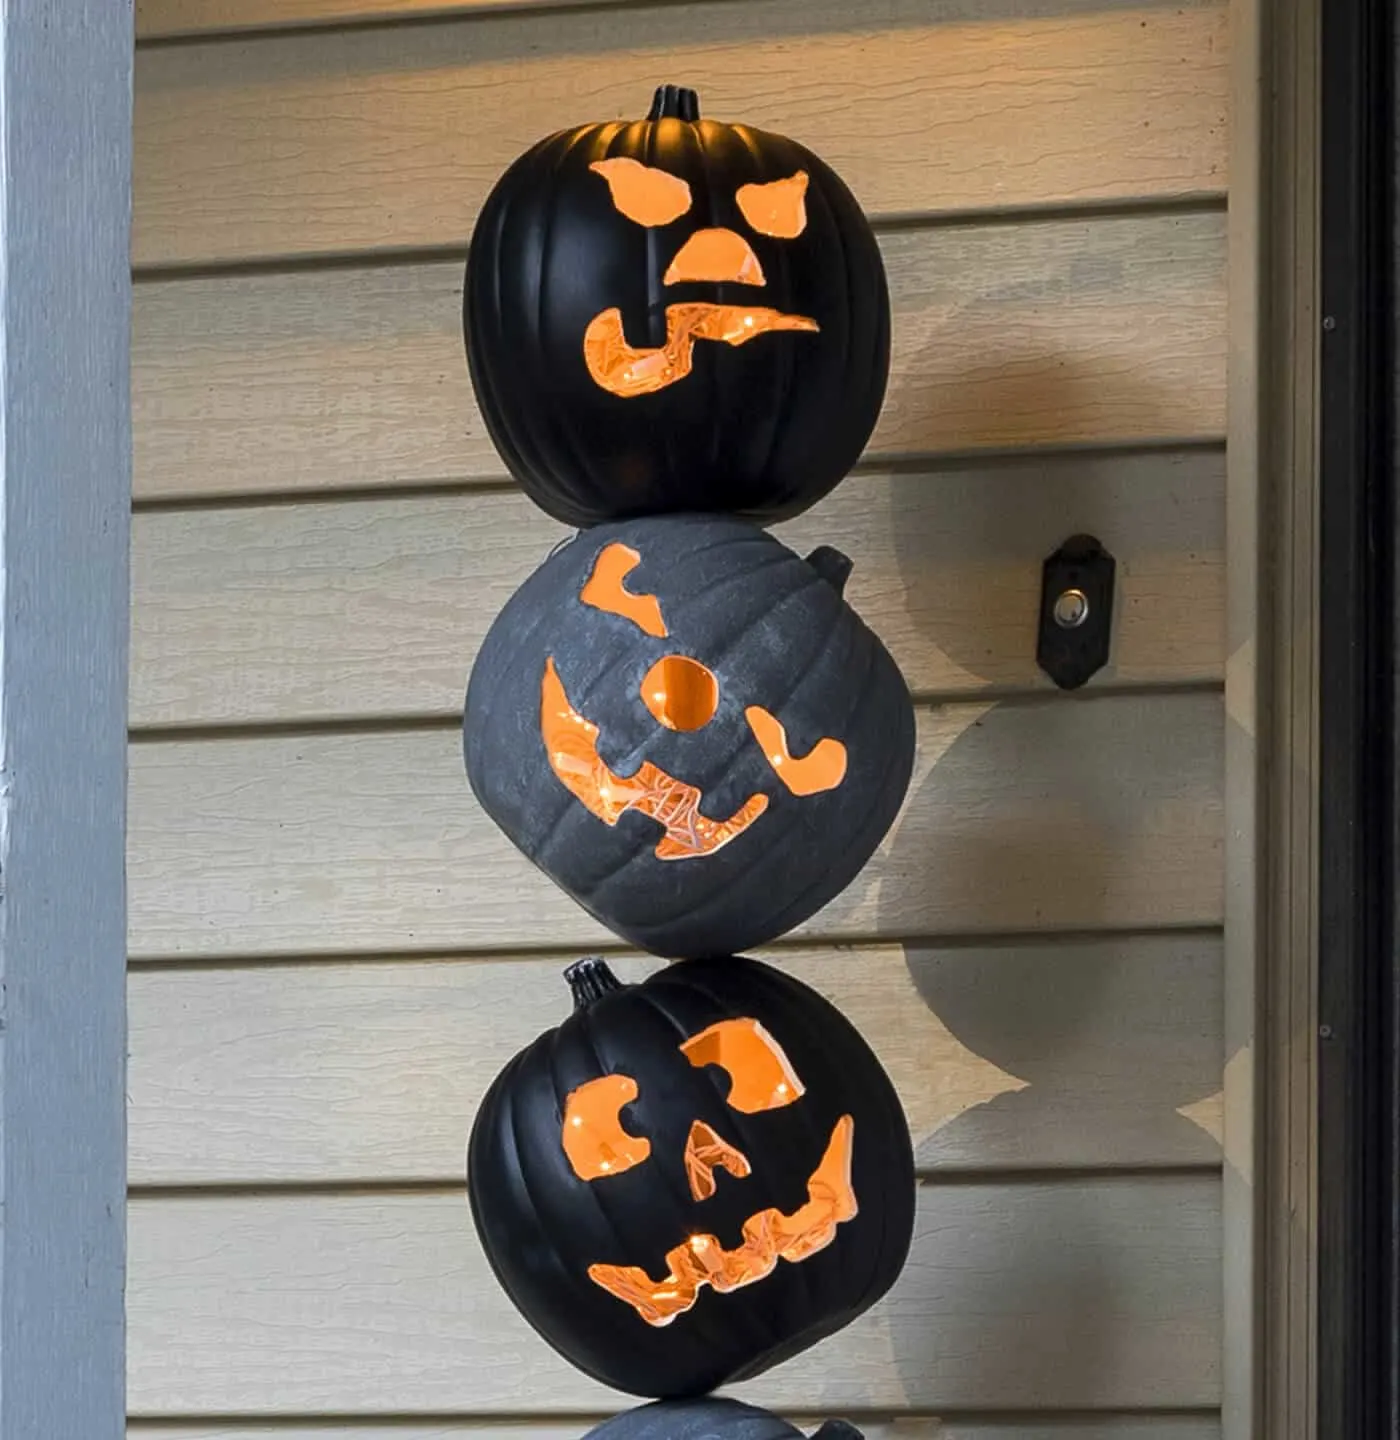 Grab some faux pumpkins from the craft store and create this unique Halloween pumpkin topiary! It will look perfect on your front porch. So festive!